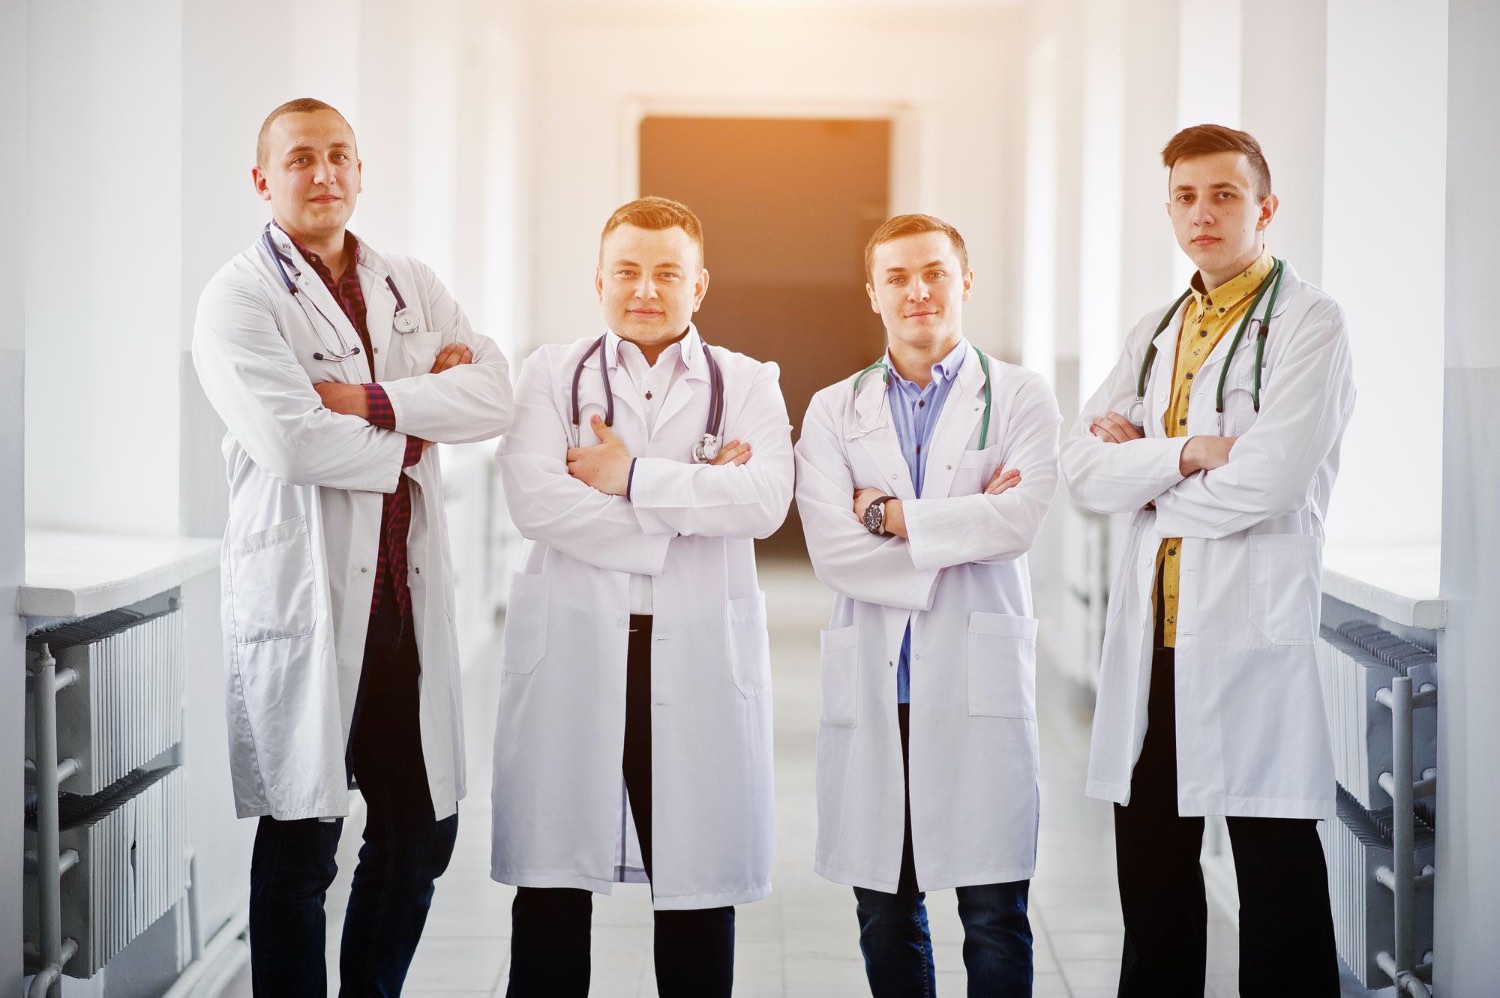 four-confident-male-doctors-white-coats-with-stethoscopes-standing-hallway-hospital